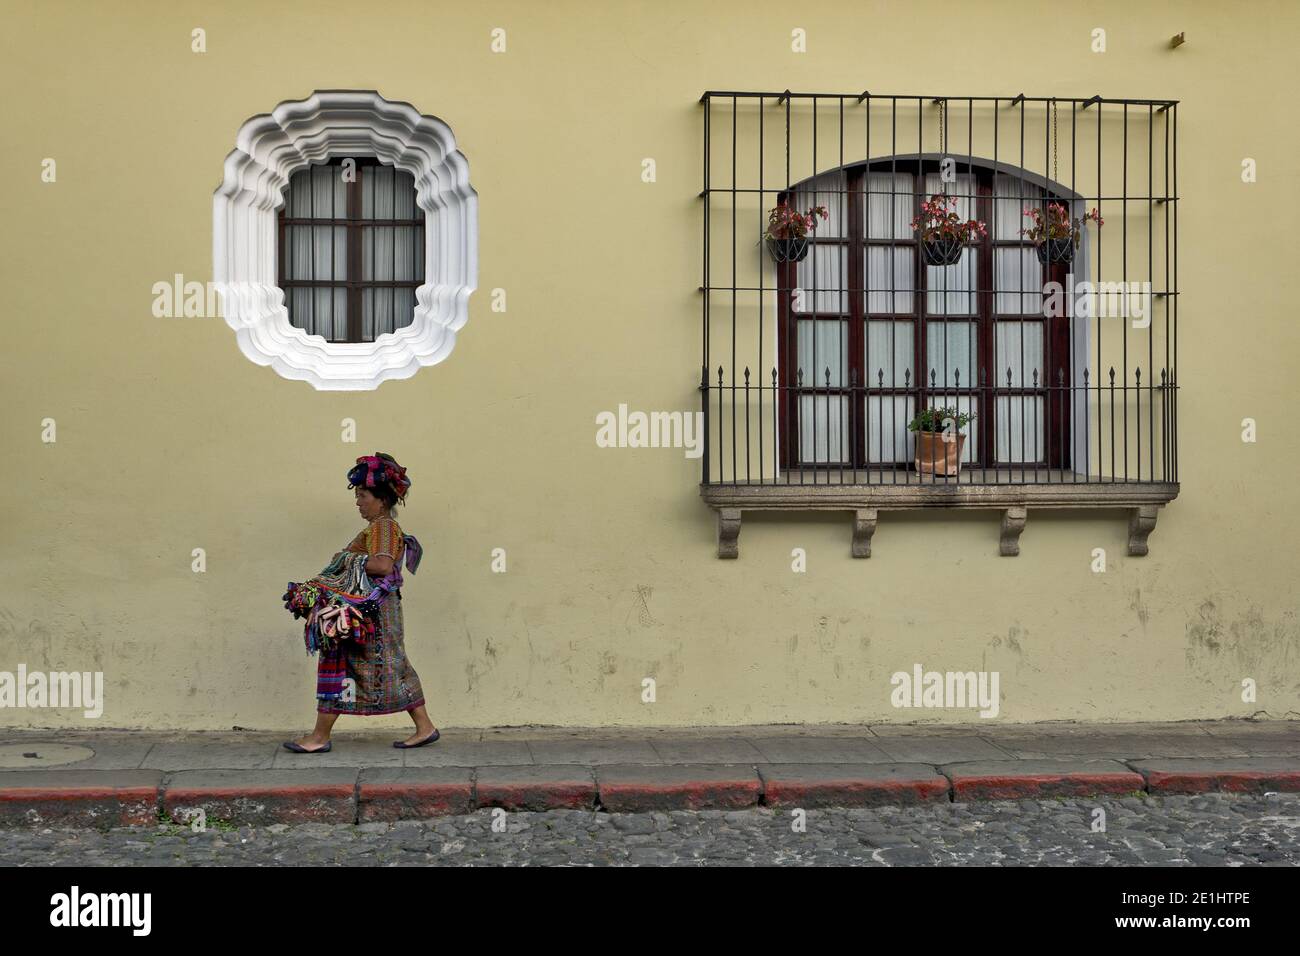 Mayan woman in traditional clothing on a historic facade in Antigua, Guatemala, Central America Stock Photo